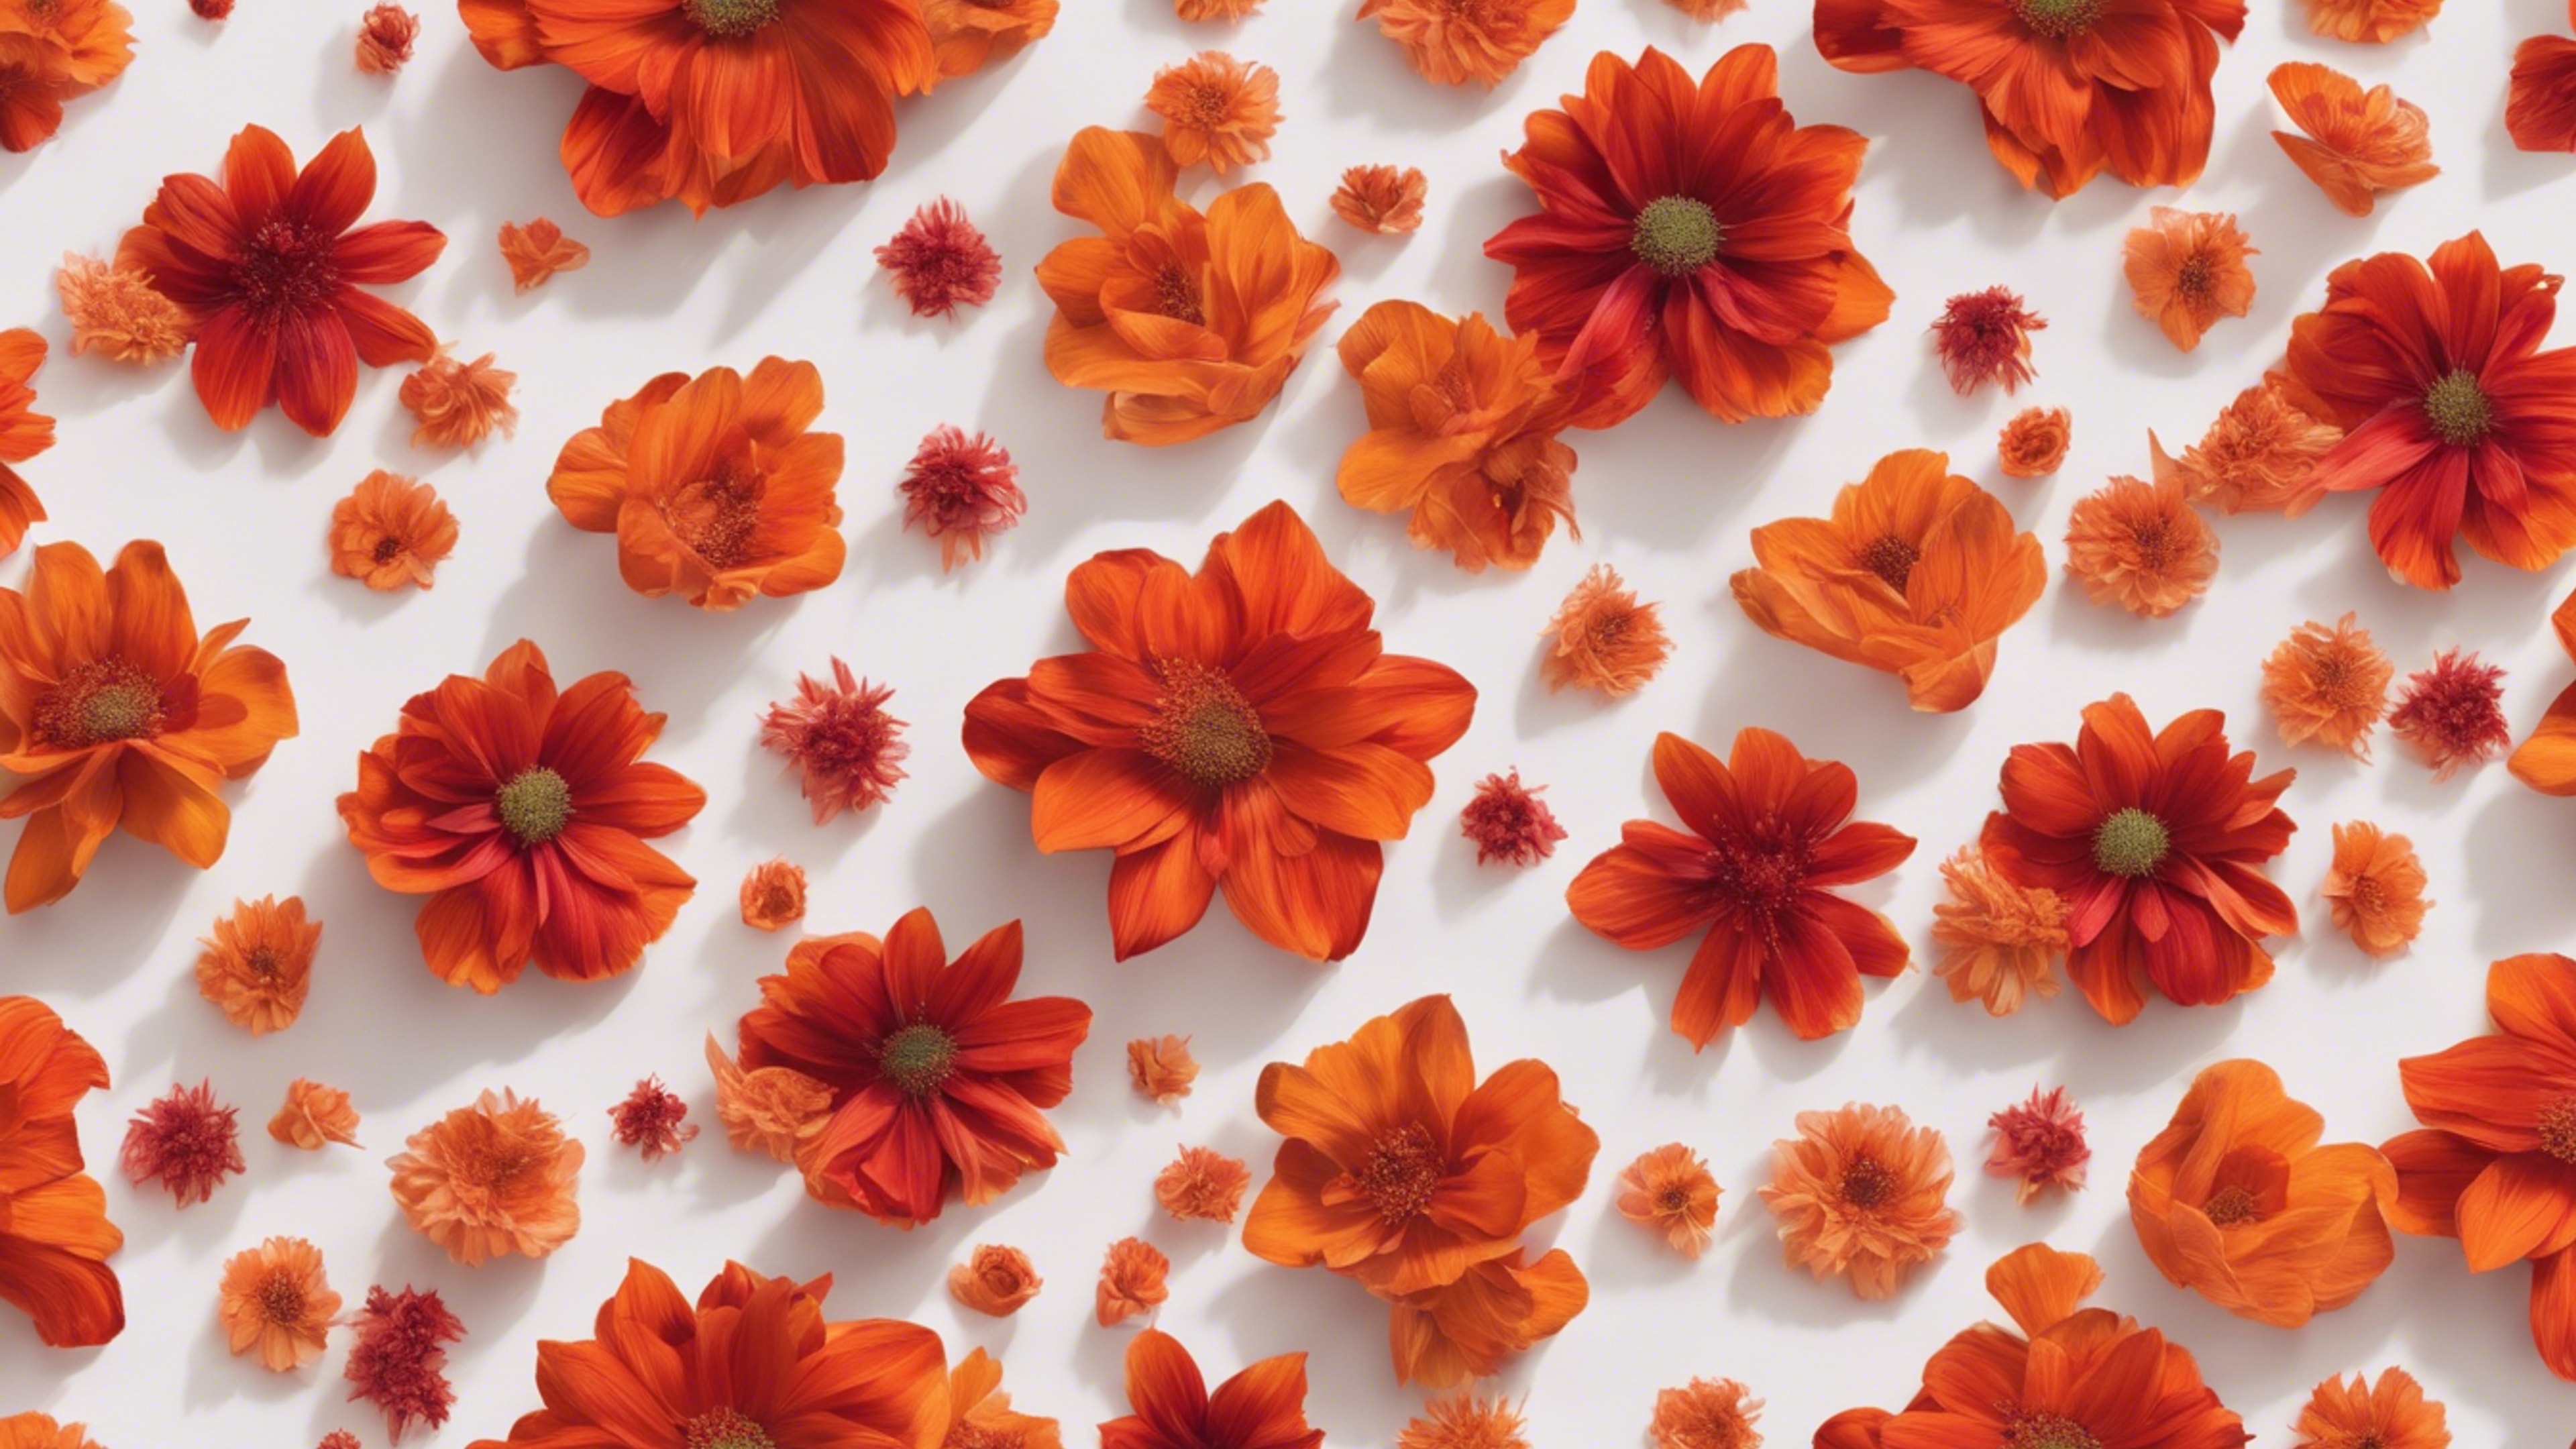 Vibrantly swirling patterns of red and orange flowers that consist of delicate petals and leaves in a seamless layout. Шпалери[1a3317c1e5234fee8b43]